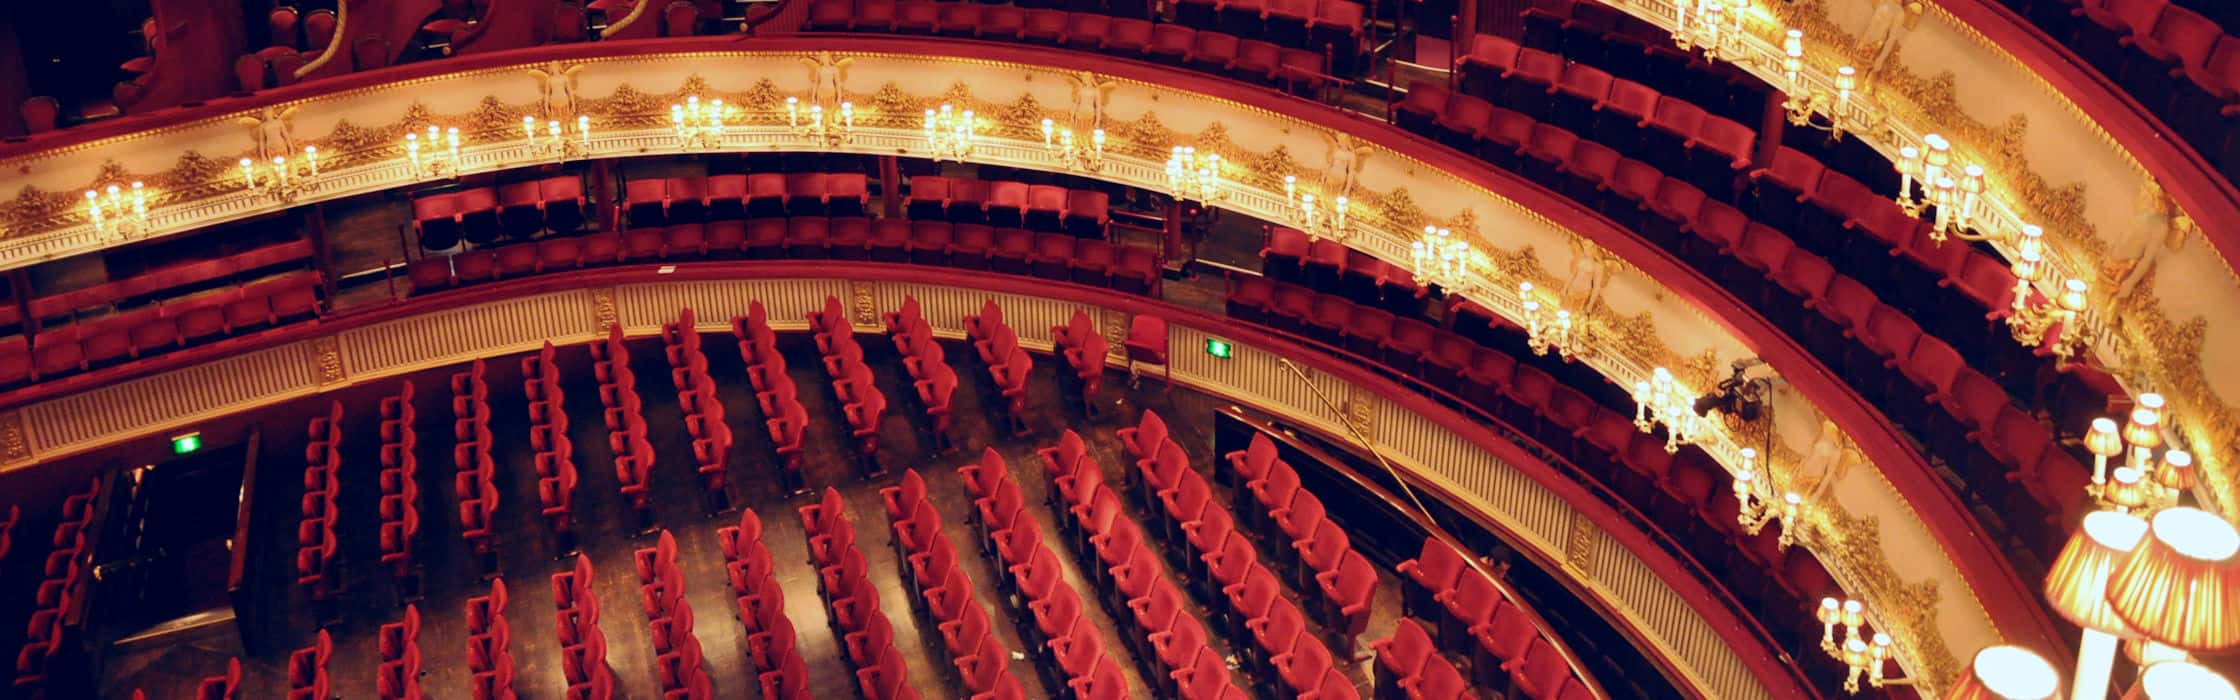 What's On at The Royal Opera House, London